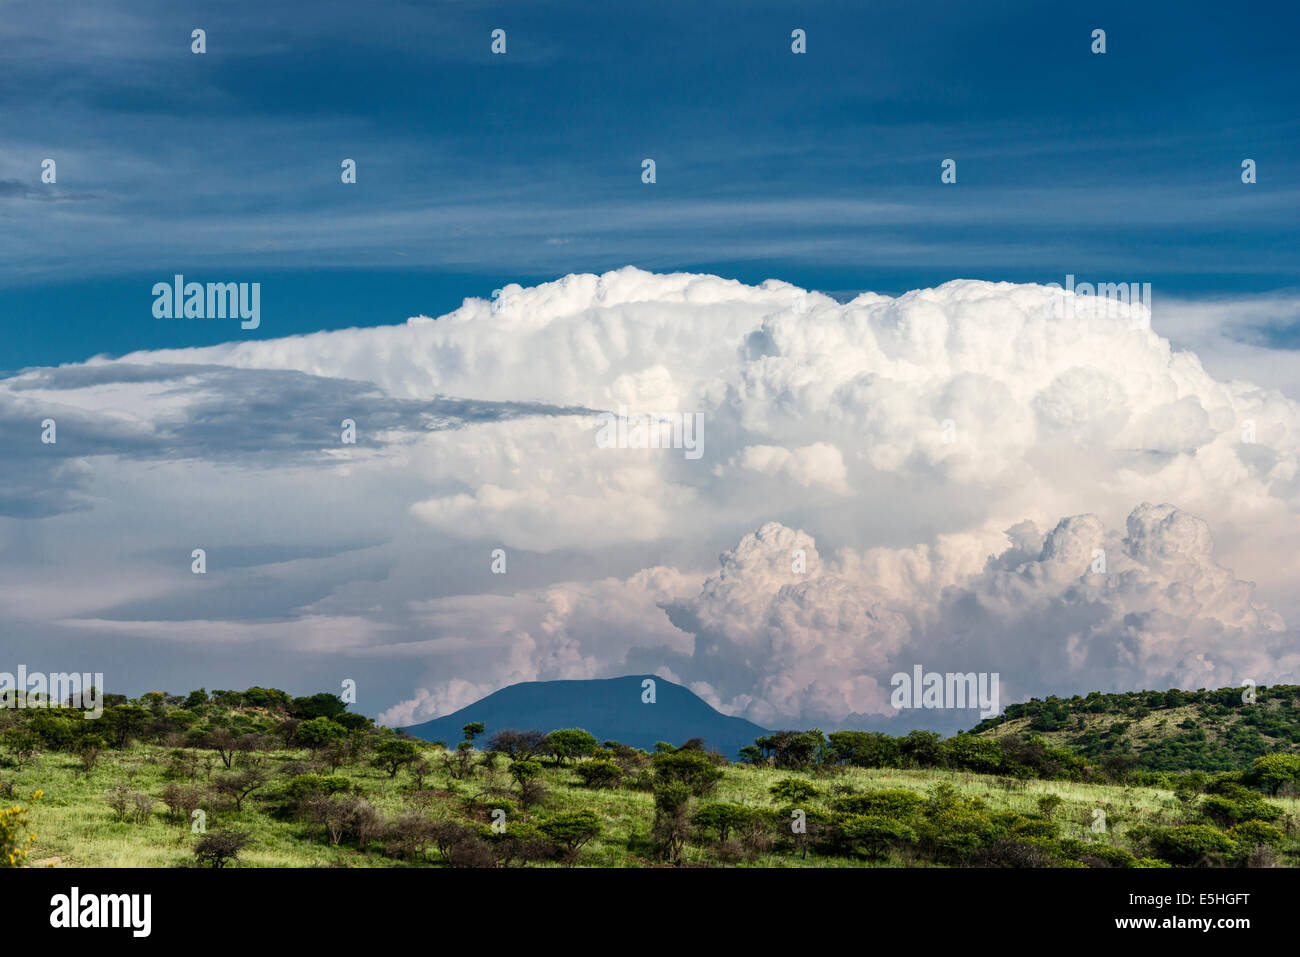 Cloud formation above trees with view to horizon in Nambiti Reserve, Kwa-Zulu Natal, South Africa Stock Photo